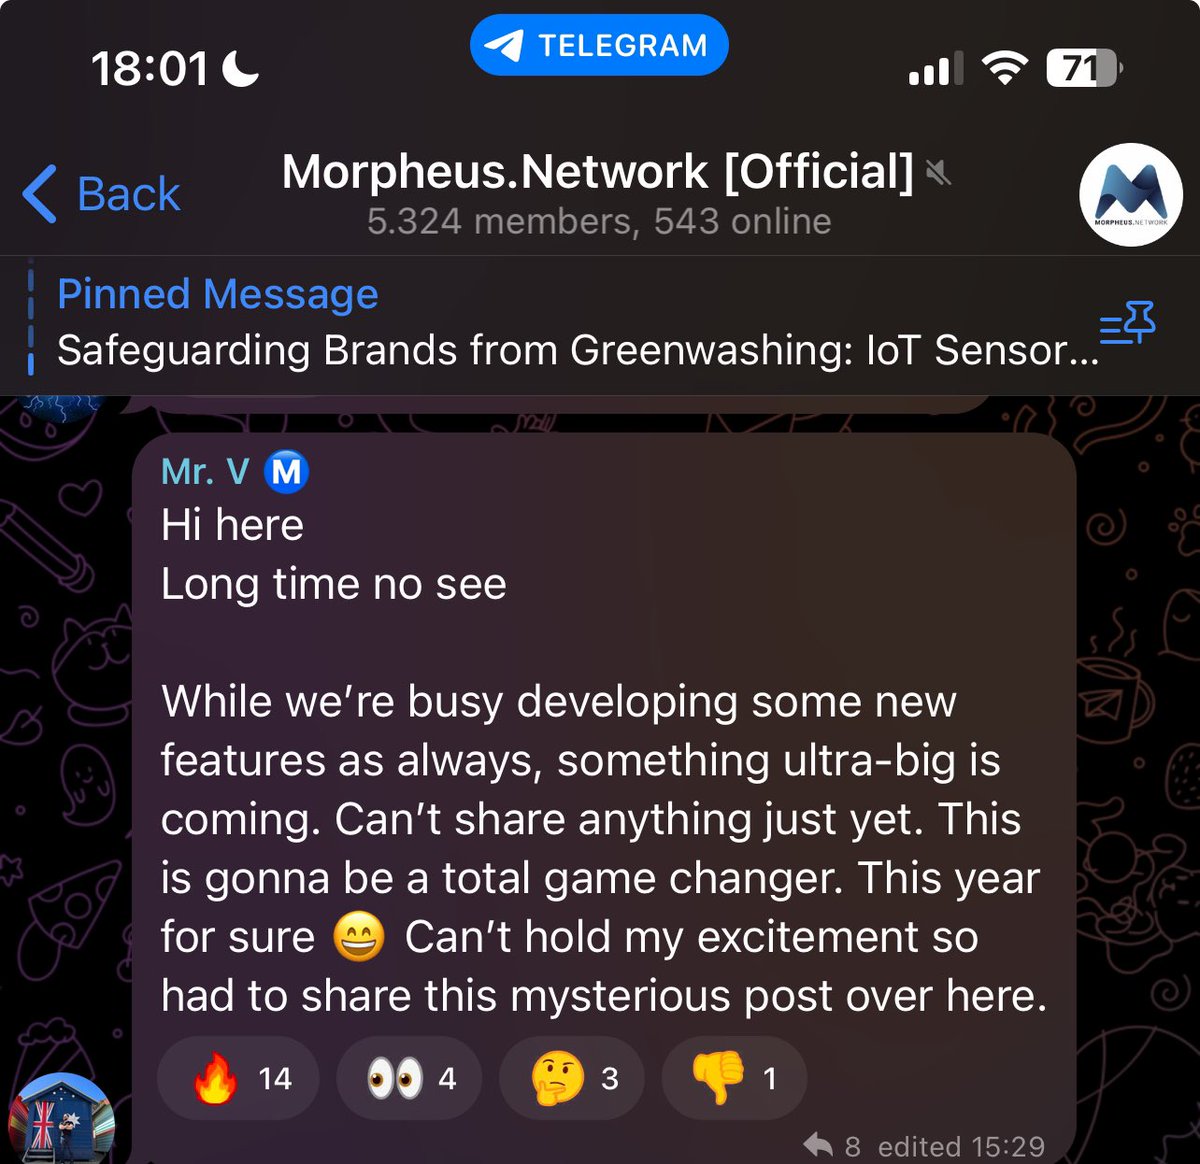 Something sensational happening for $MNW

What could be ultra-big and a game changer for @MNWSupplyChain?

Anyone dare to guess what this is about?

Mr. V (Volodymyr) who is responsible for the masternodes dev team at Morpheus just said this: